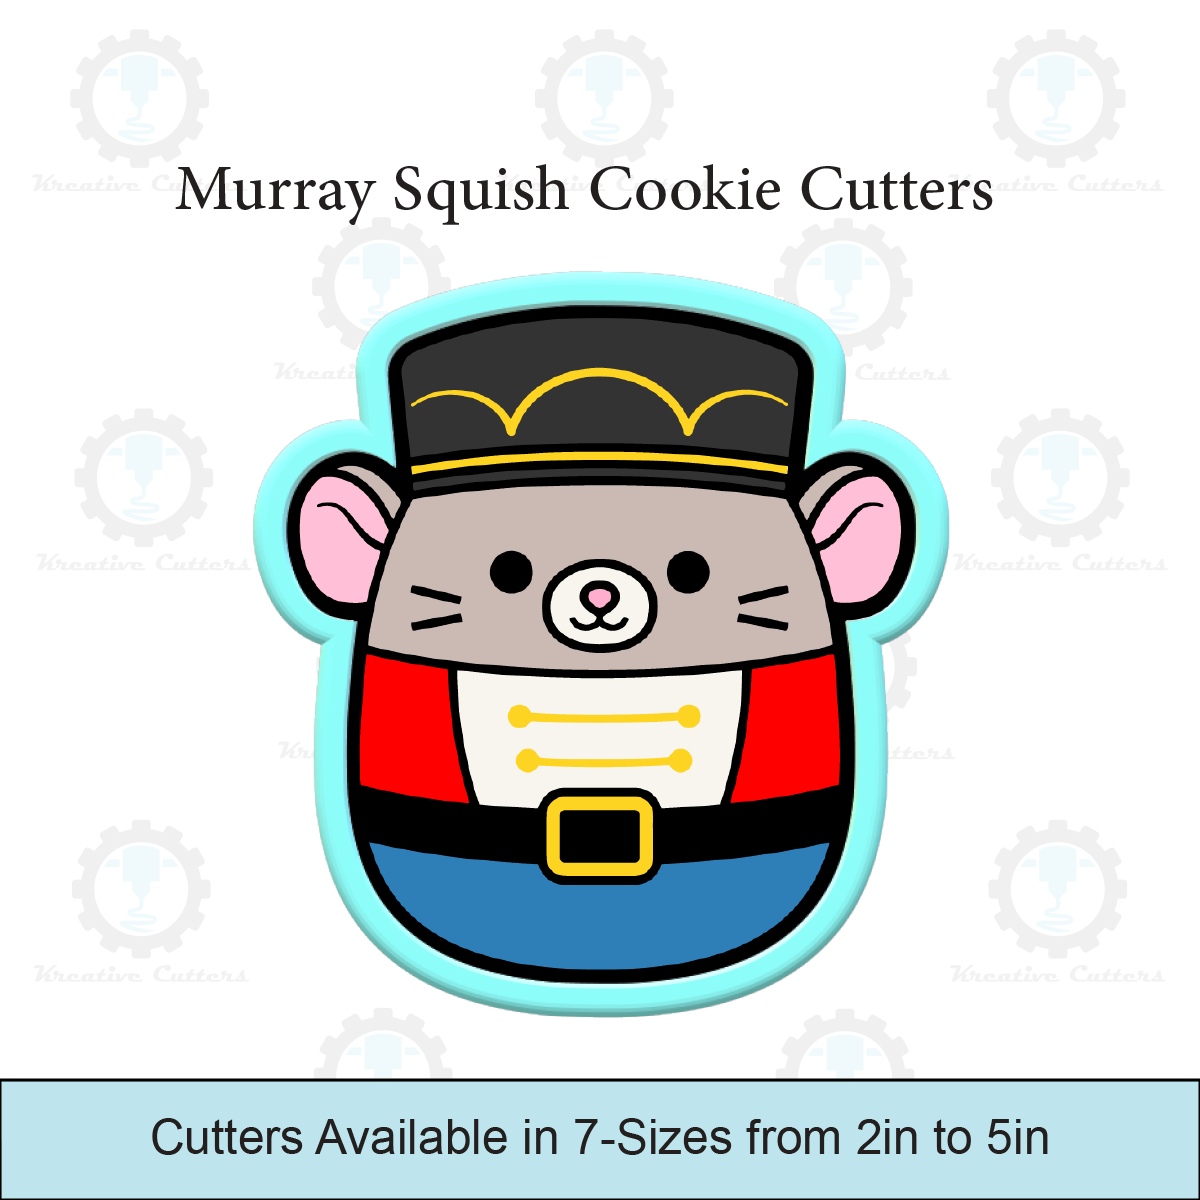 Murray Squish Cookie Cutters